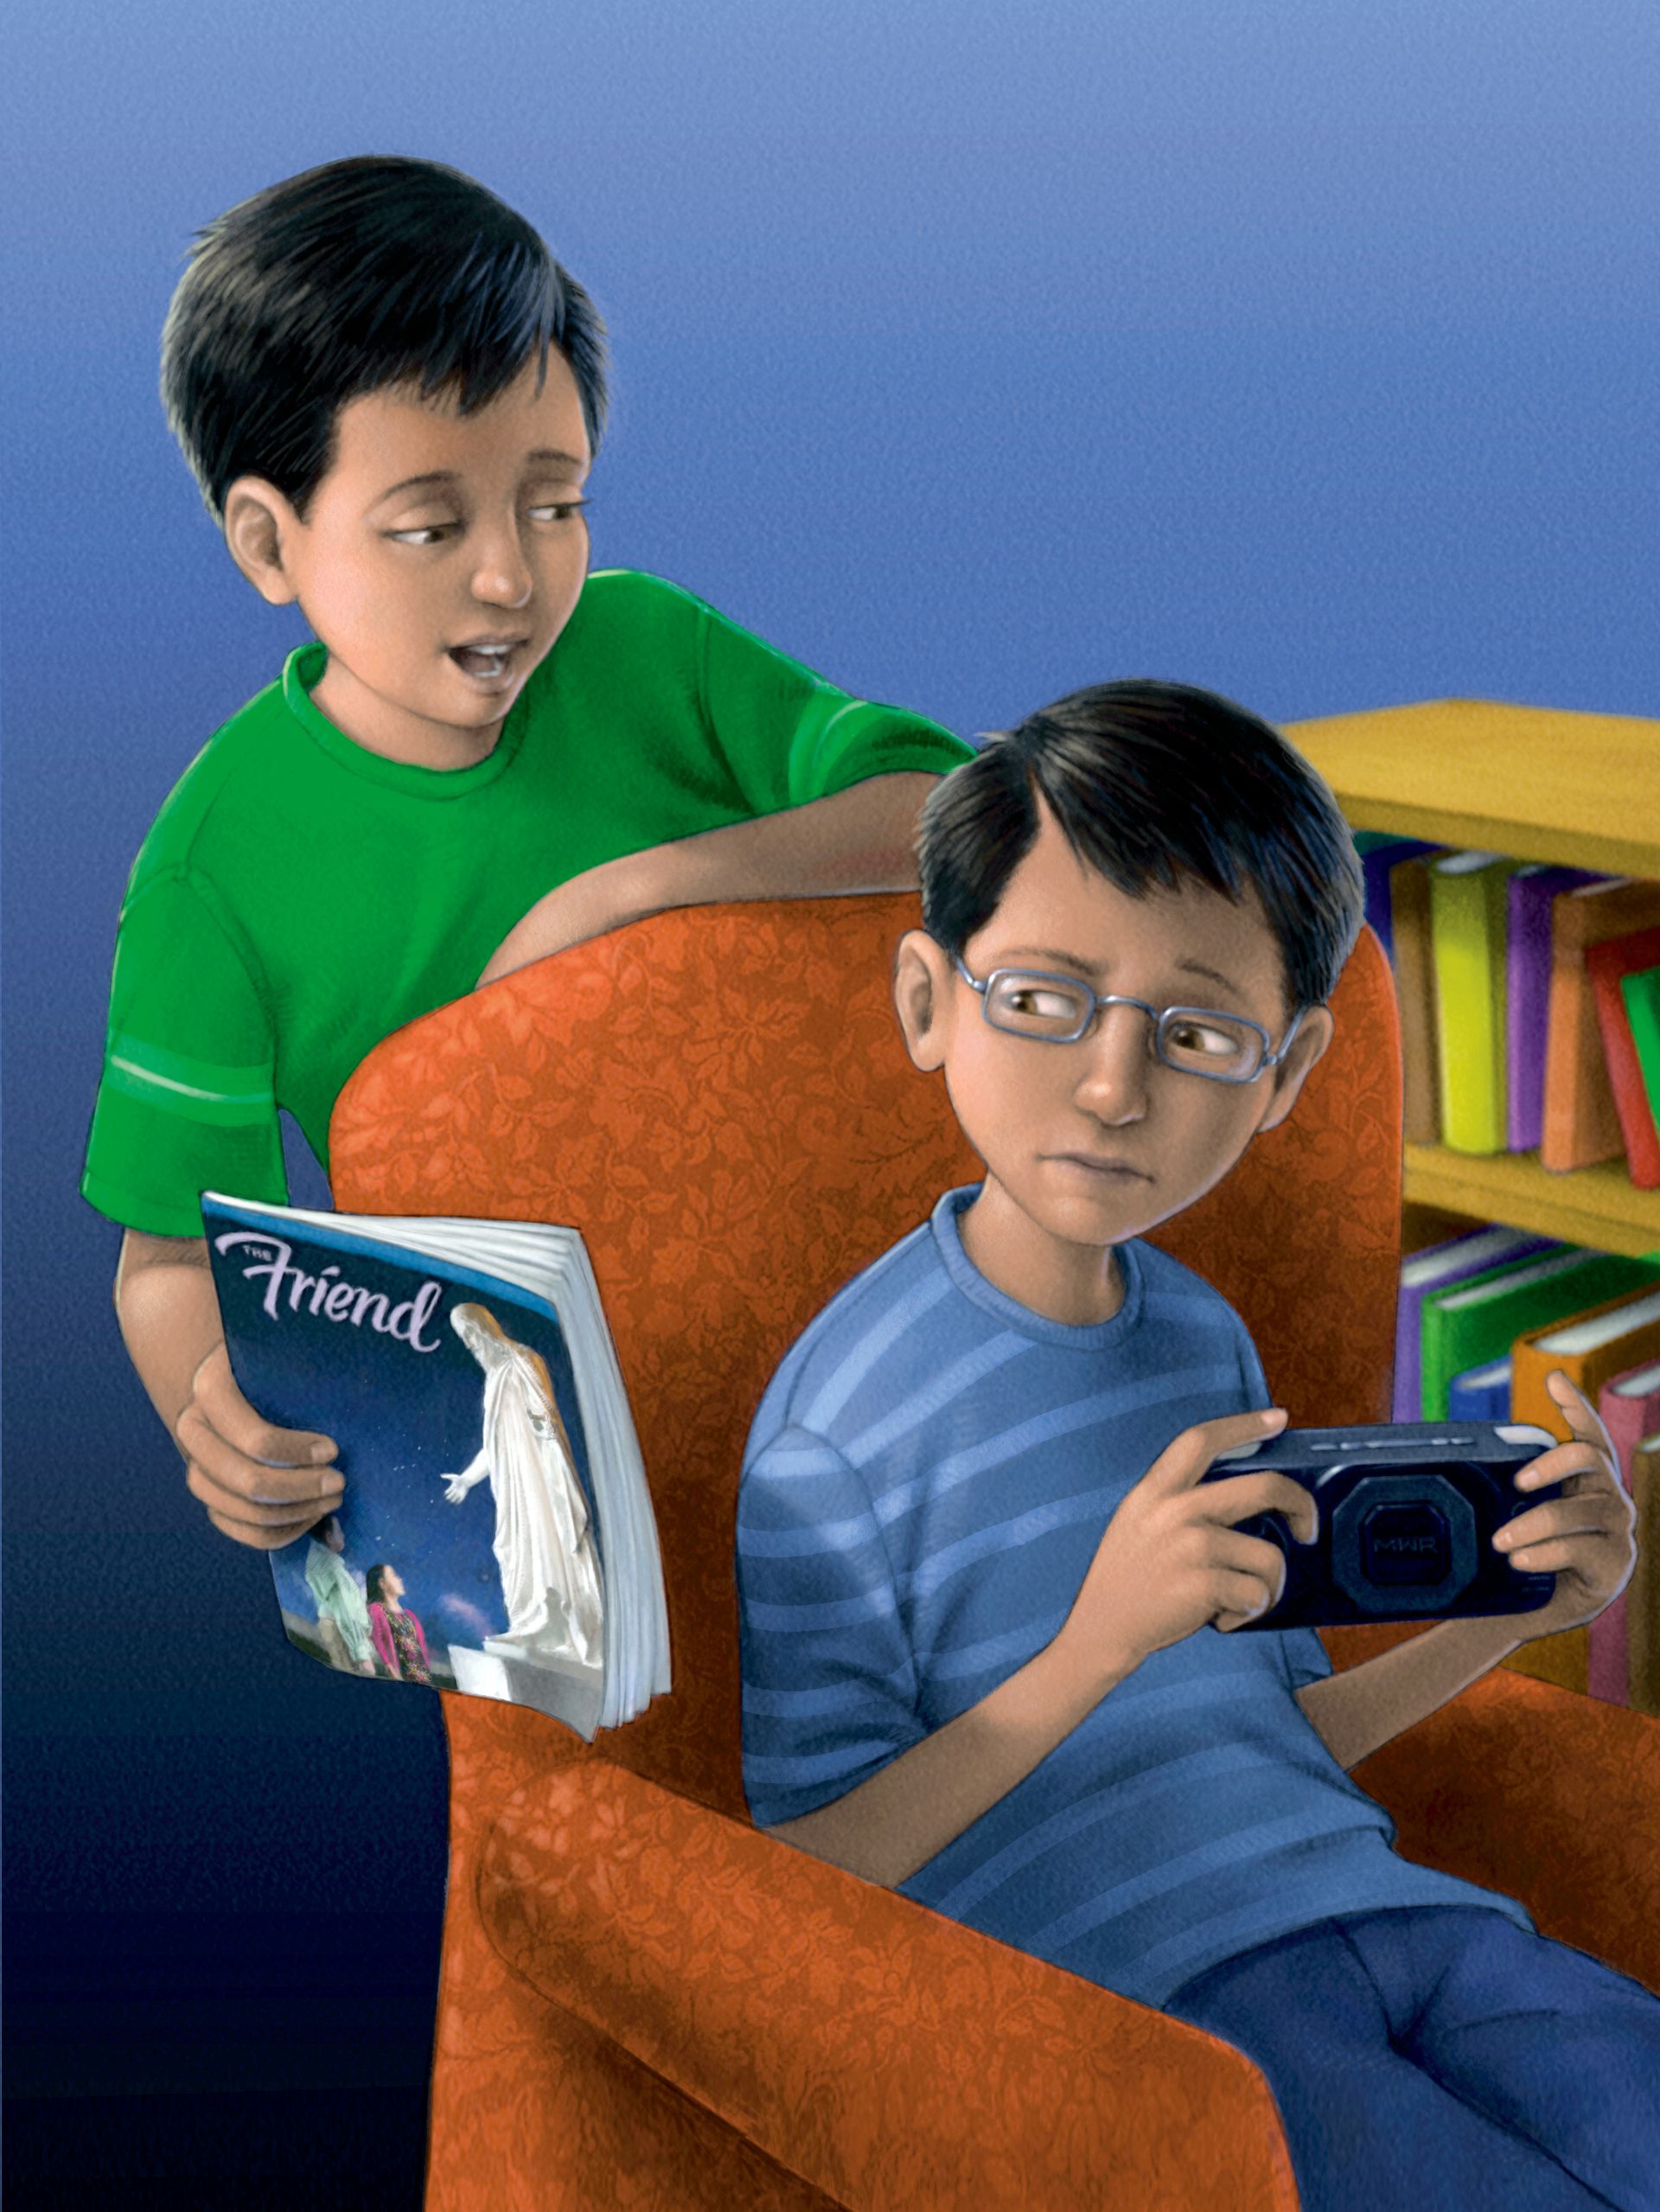 A boy tries to share a copy of the Friend magazine with his brother, who is sitting on a chair.